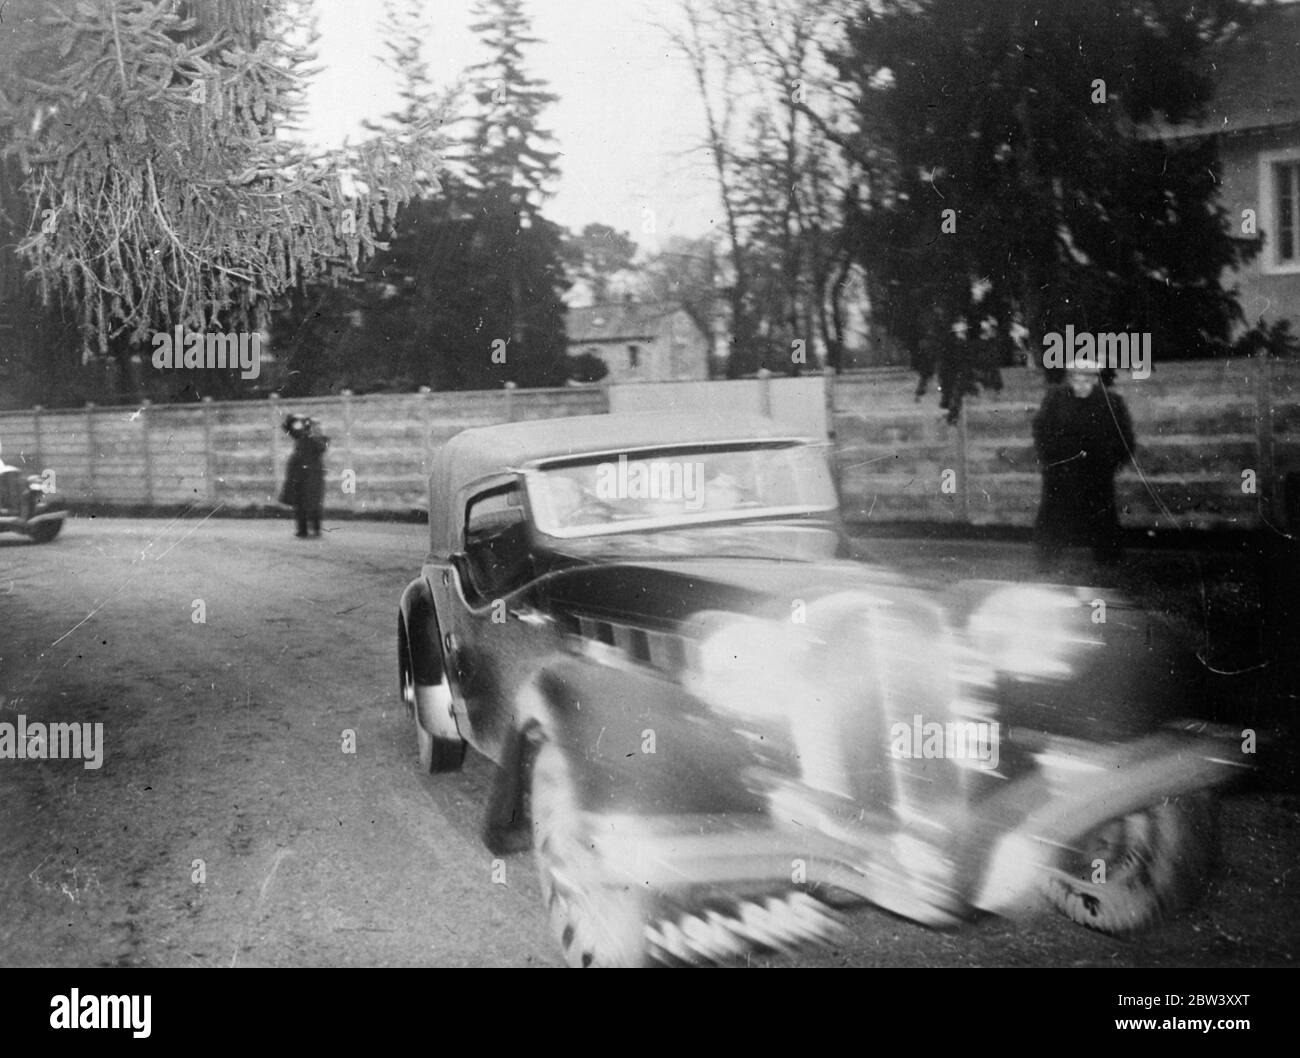 Mrs Simpson arrives at new home . Mrs Wallis Simpson arrived at her new home , the Chateau de Canada , at Monts , 20 miles from Tours , France , by car , entering through one of the little known entrances . She was accompanied by Mr and Mrs Herman Rogers , who were her hosts at Cannes . To distract attention a decoy car was driven through the main entrance . Mrs Simpson is the guest at Chateau de Canae of Mr and MrsCharles E Bedaux . Photo shows , Mrs Simpson driving into the Chateau de Cande on her arrival . 10 March 1937 Stock Photo